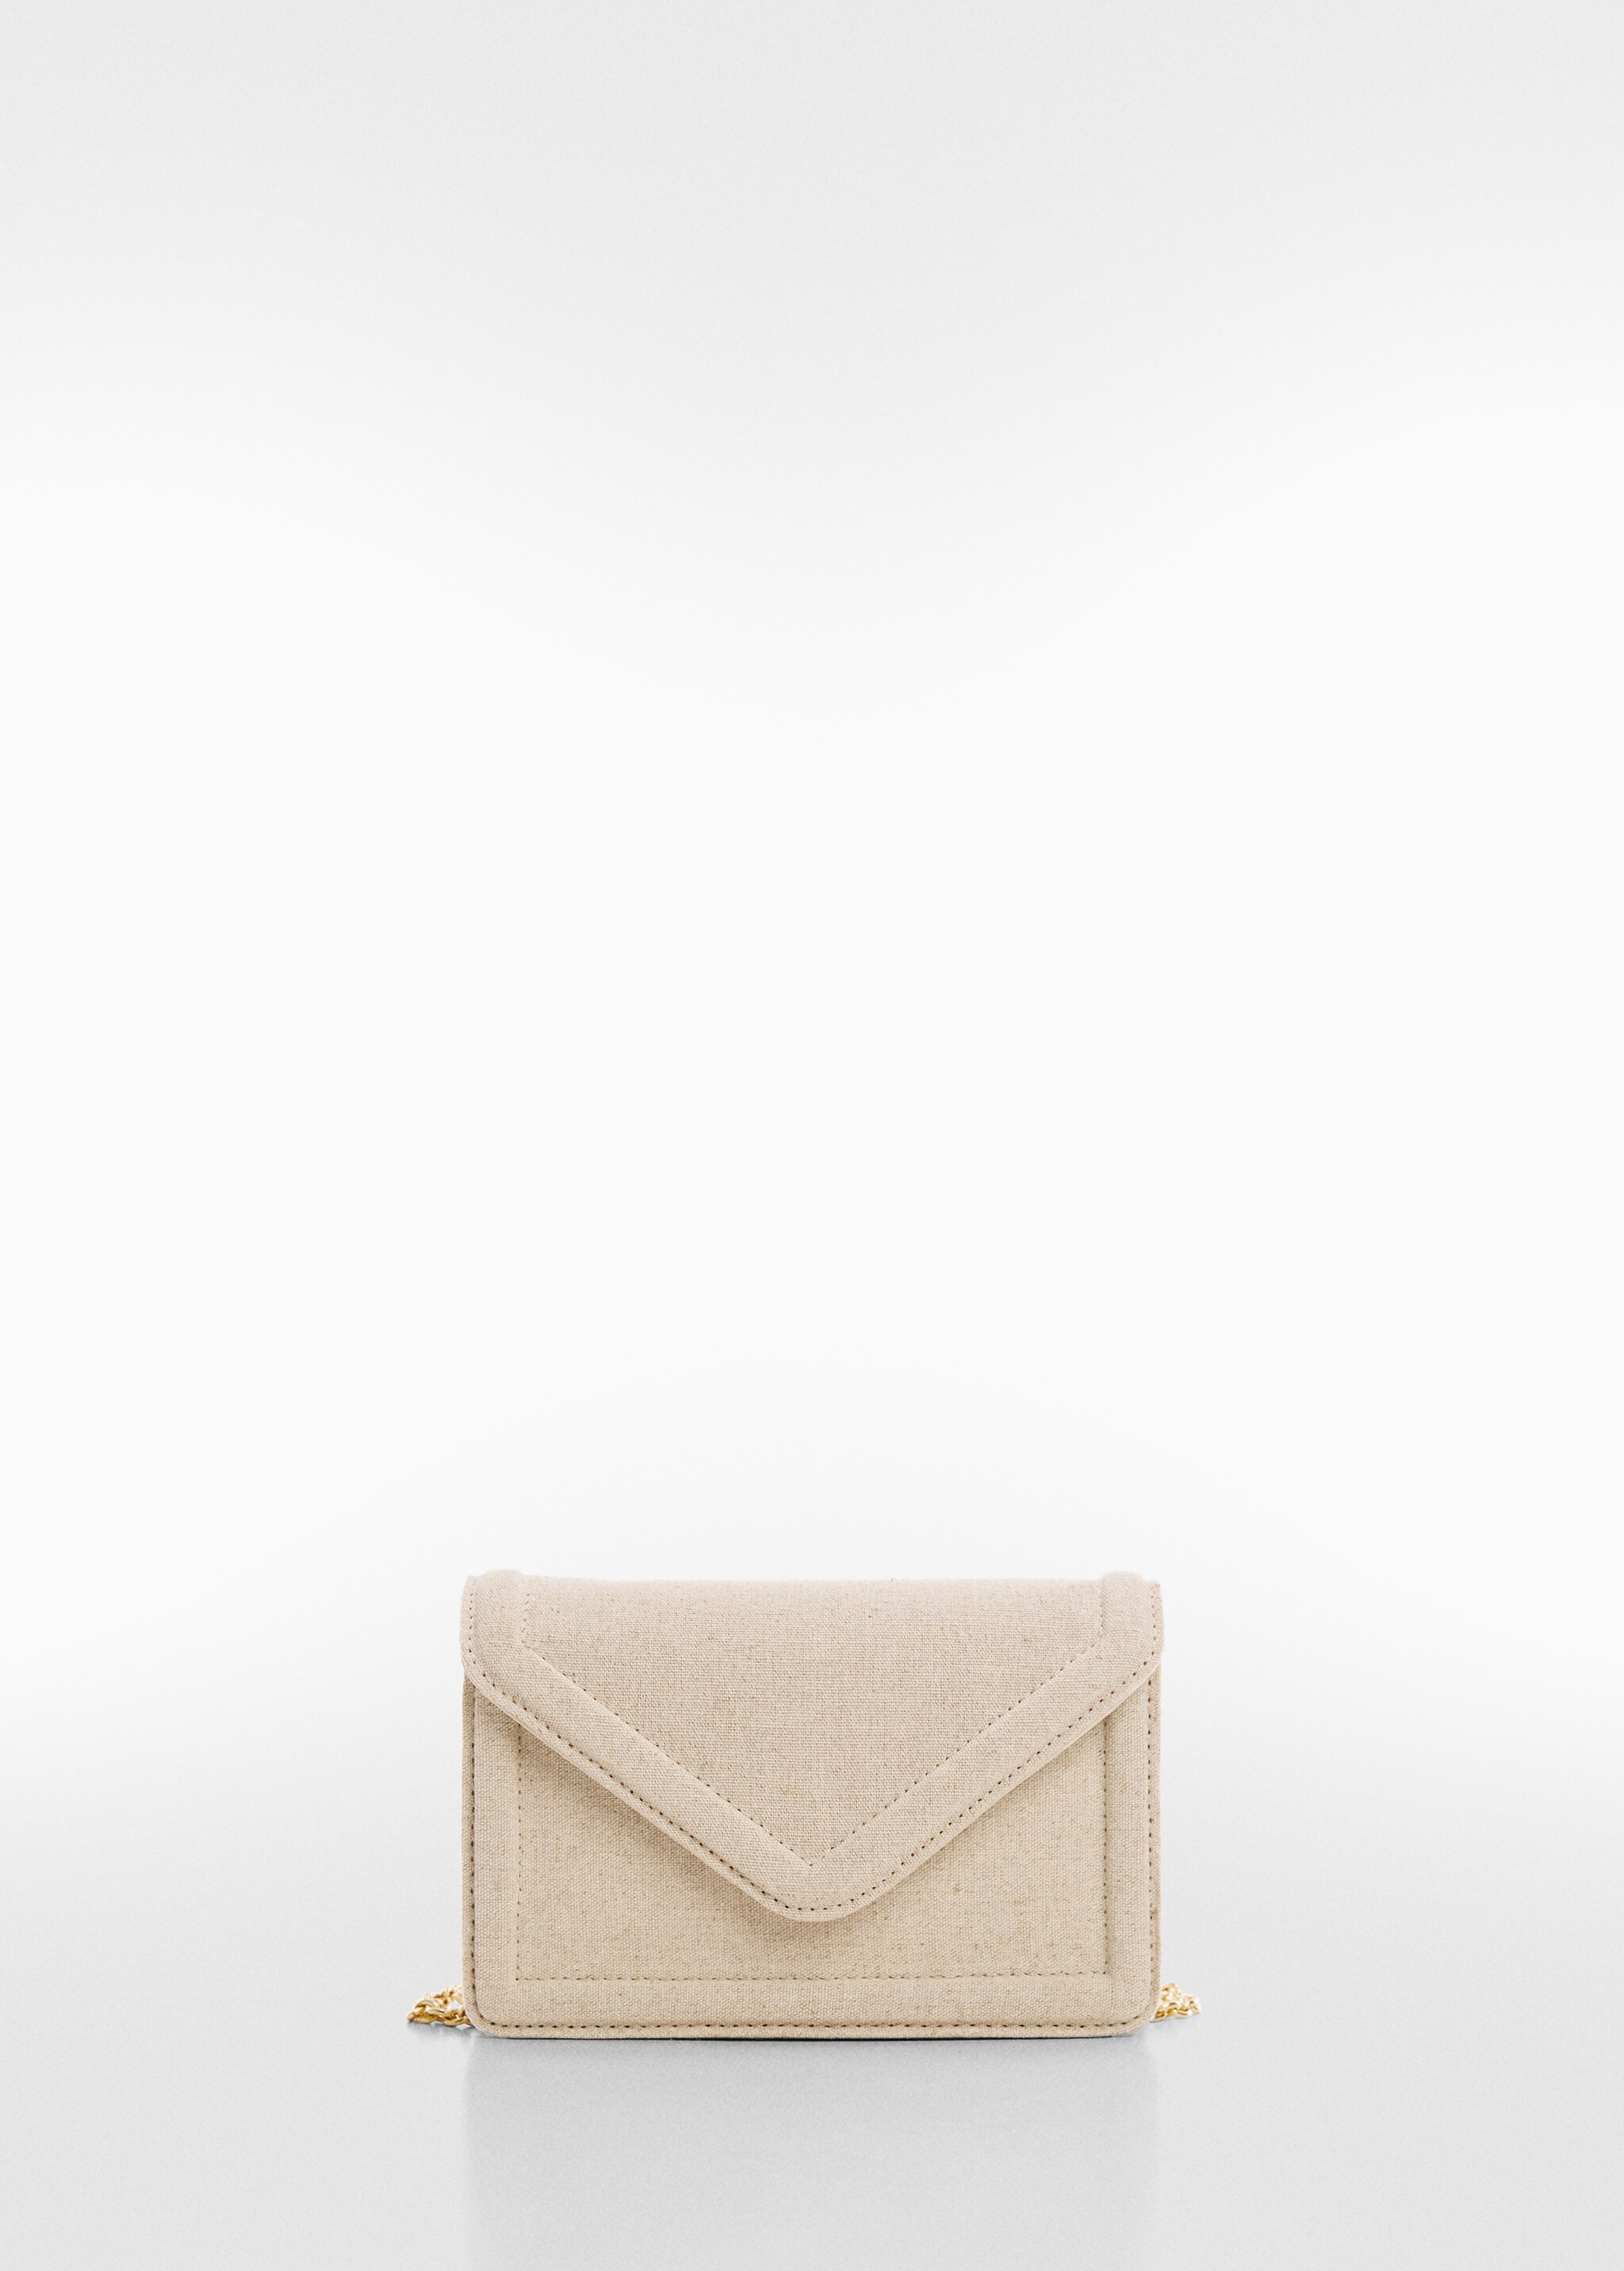 Textured bag with flap - Article without model